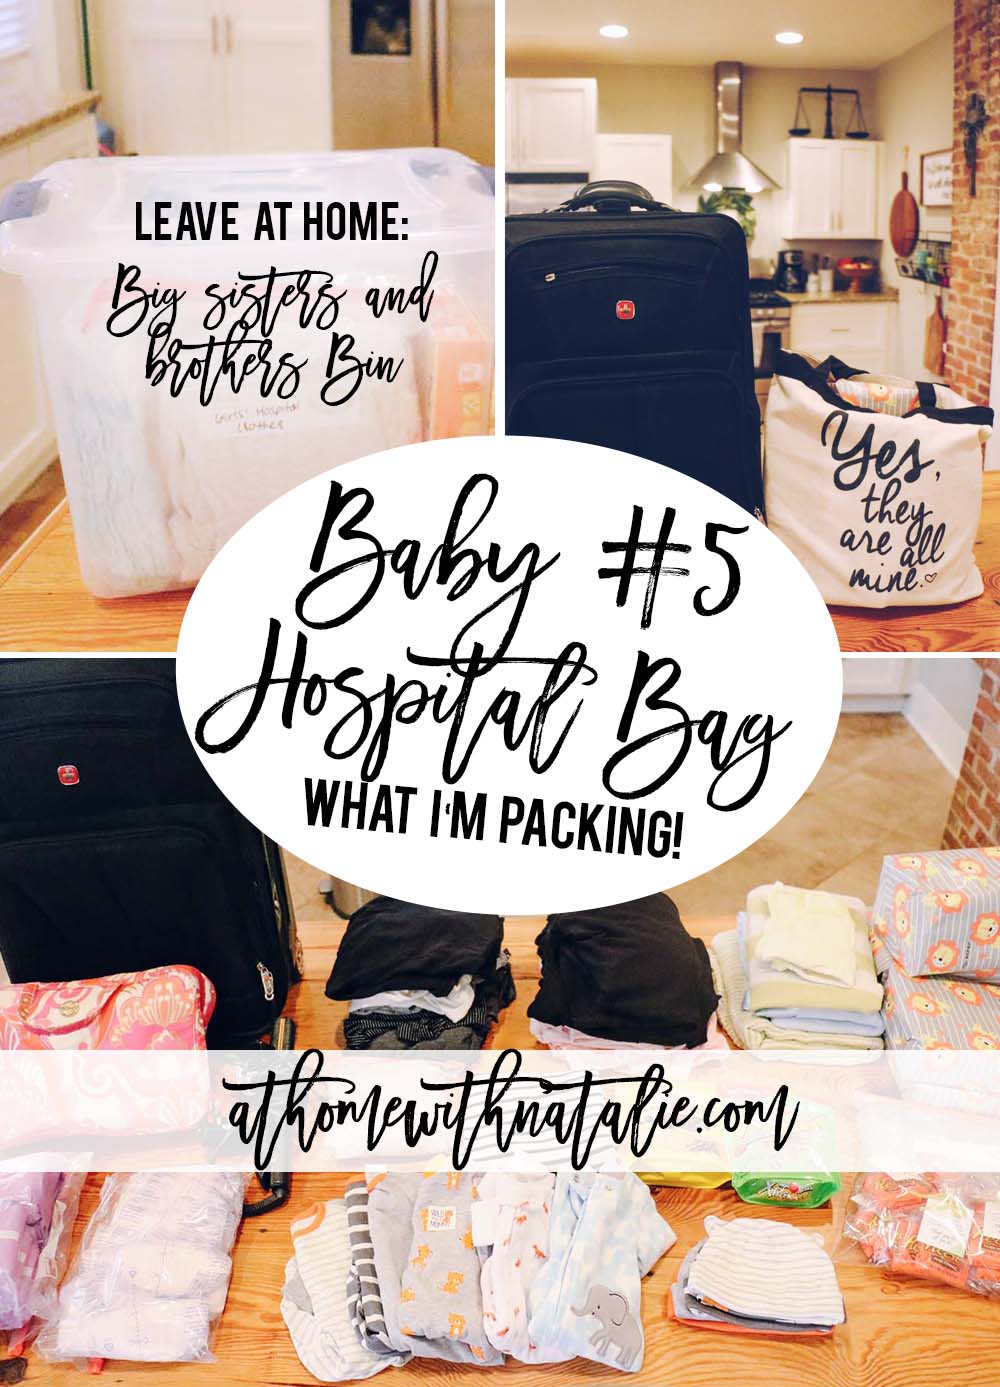 what to take to hospital for baby